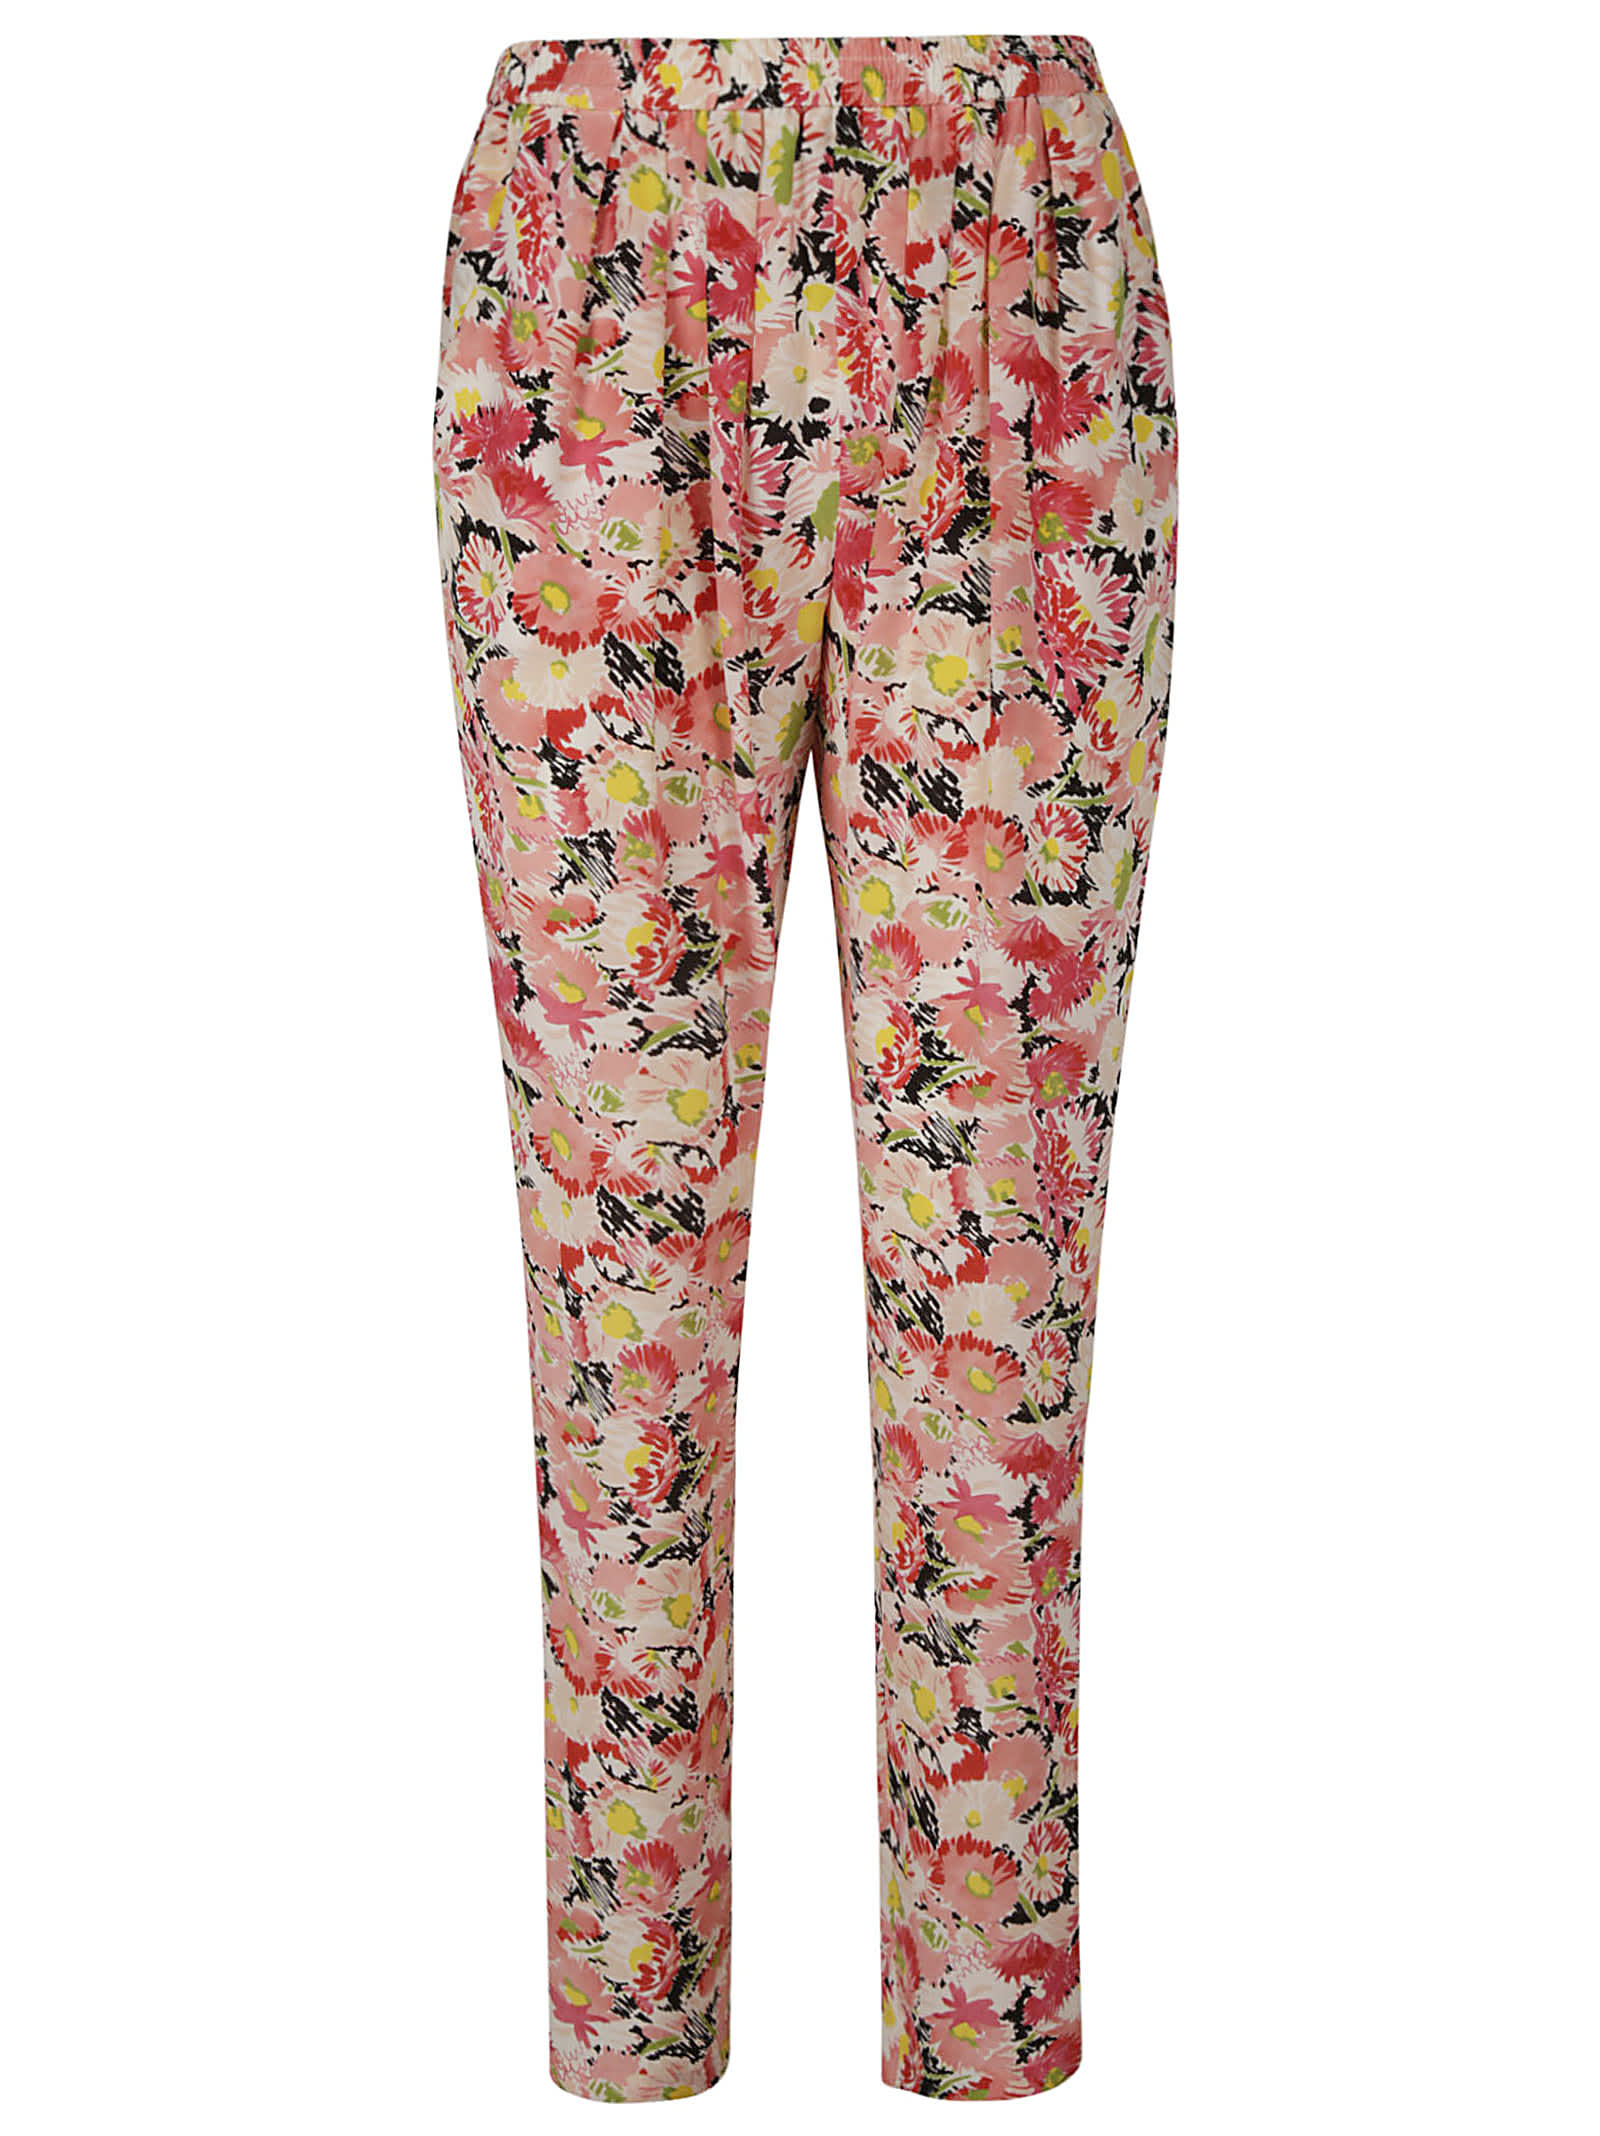 Stella McCartney Floral Printed Trousers